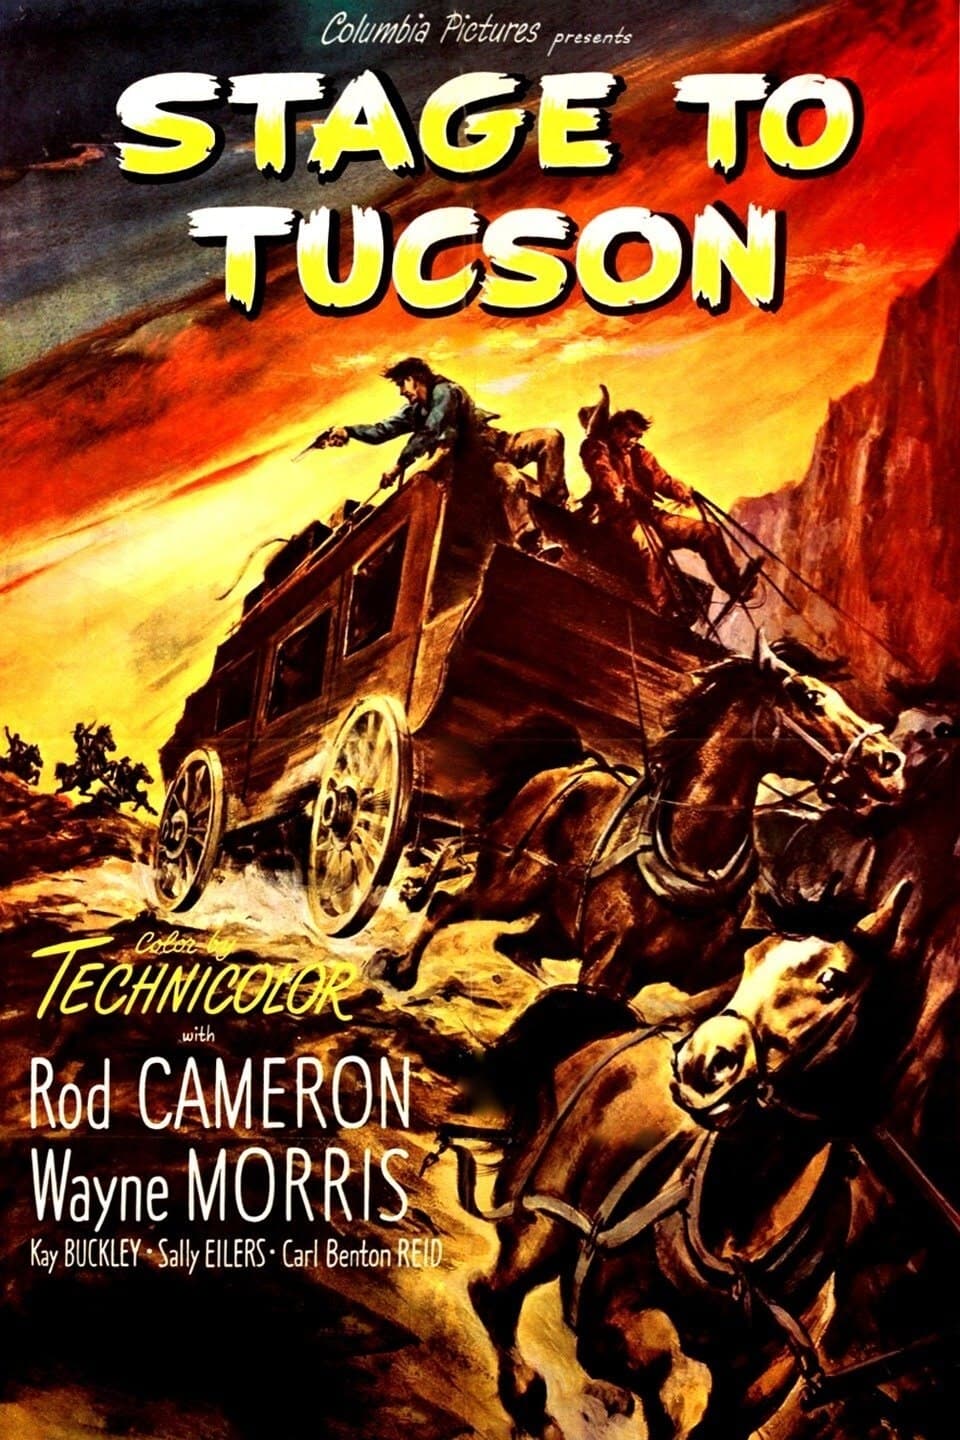 Stage to Tucson (1950)